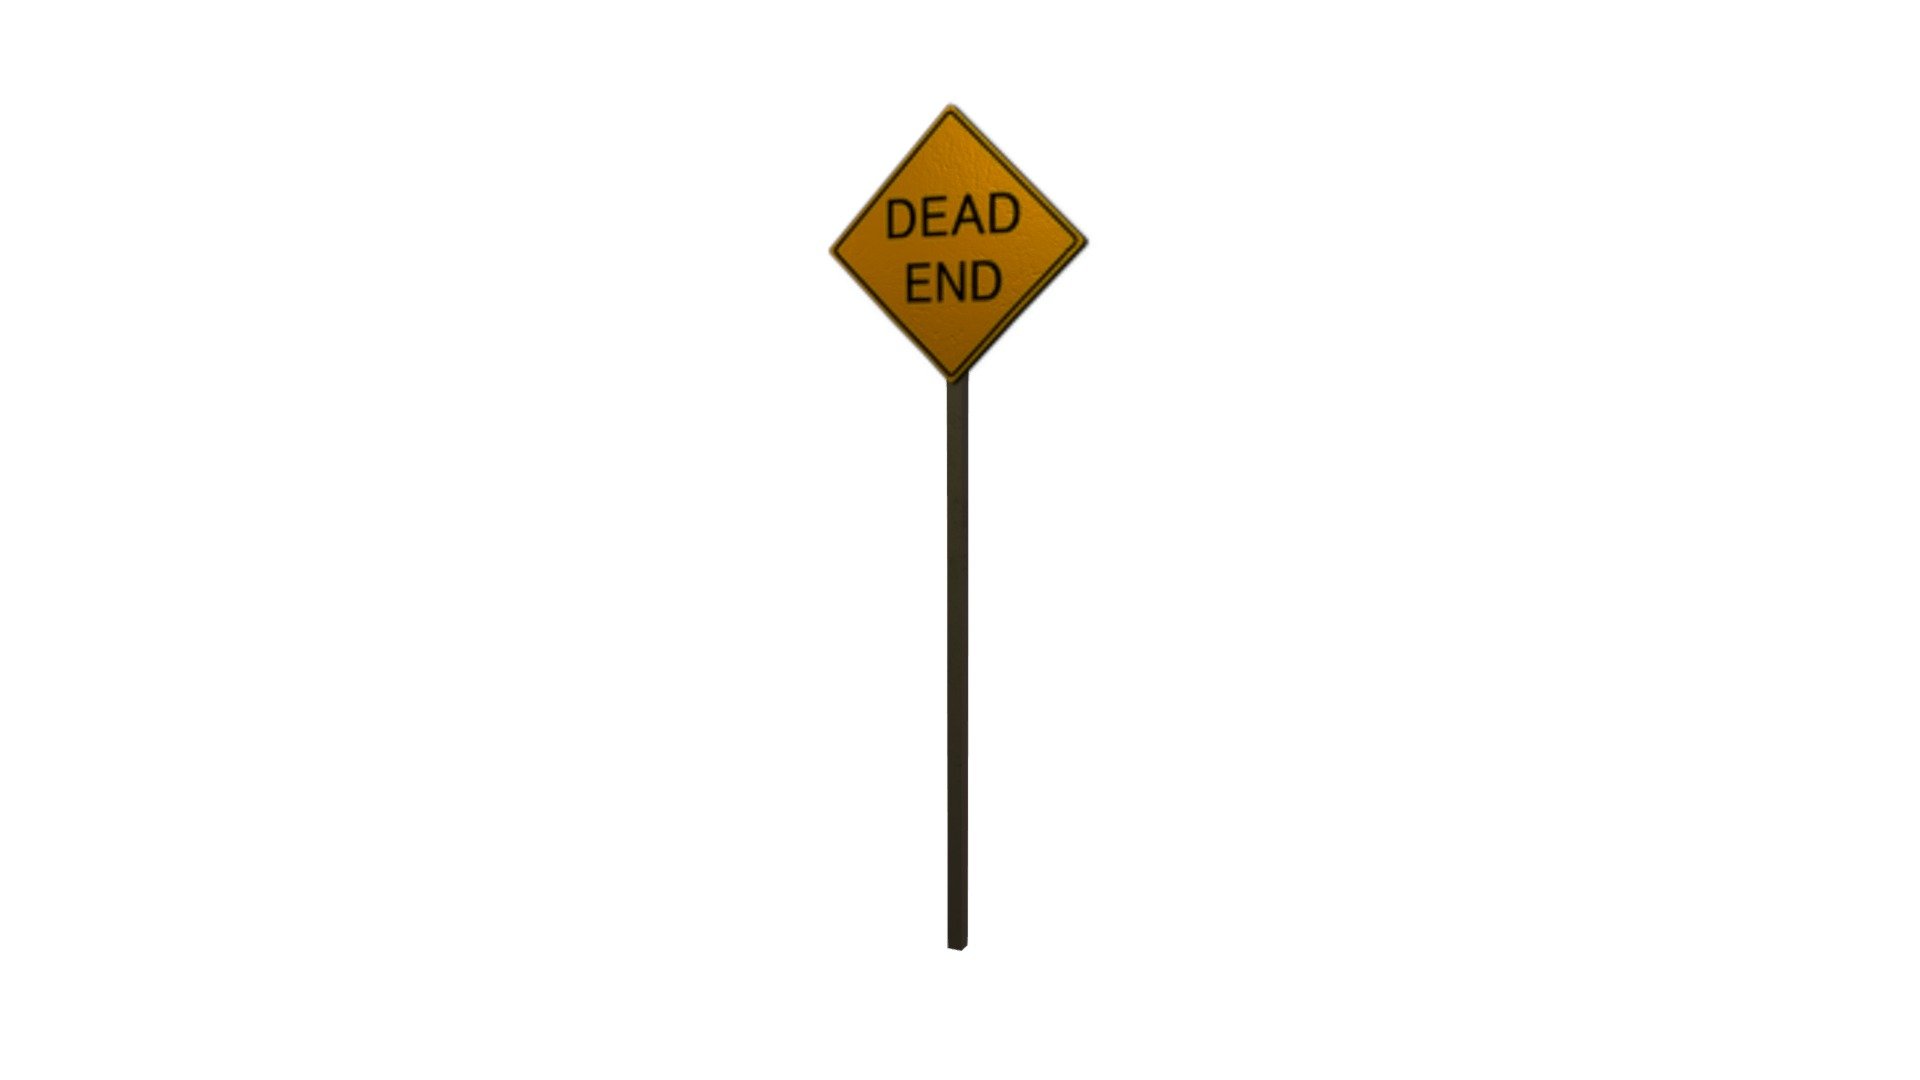 Road Sign
Made in Maya - Road Sign (DEAD END) - Buy Royalty Free 3D model by AirStudios (@sebbe613) 3d model